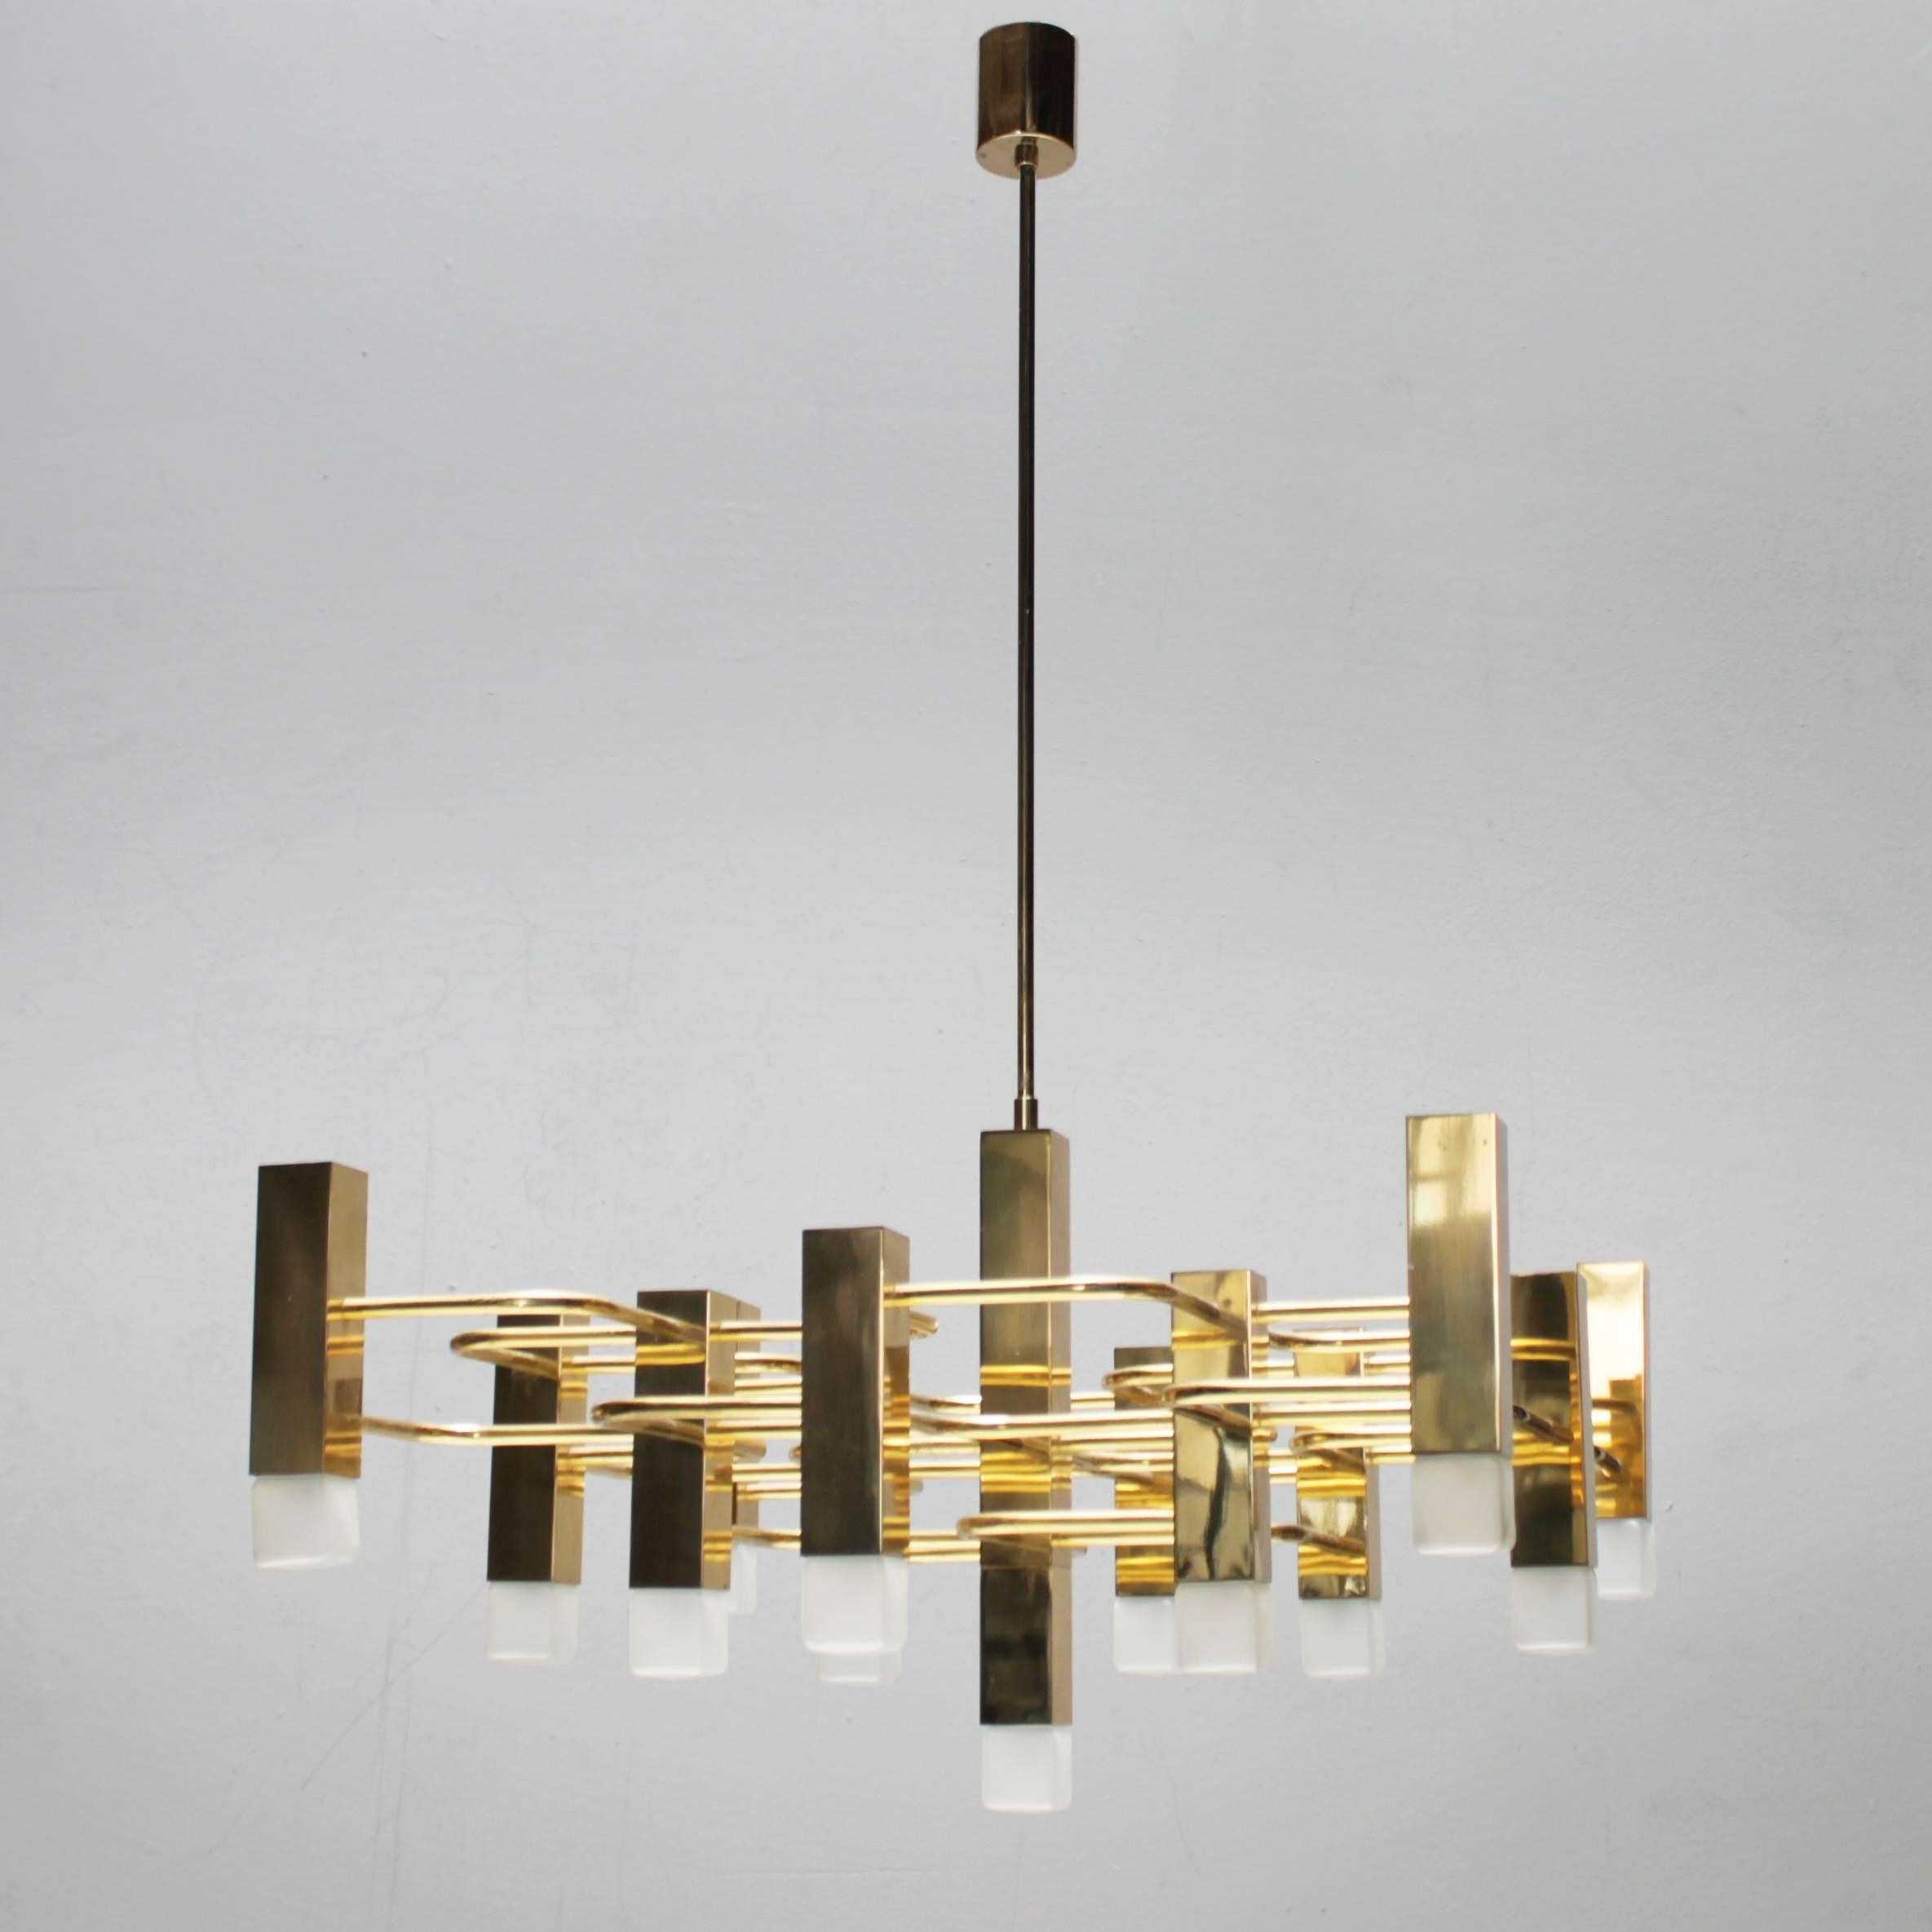 Large thirteen-lights brass chandelier by Gaetano Sciolari for S.A. Boulanger Belgium. Marked. Comes with 15 original square bulbs. Dimensions: height from ceiling till drop 39.7 inches (101 cm), width 23.8 in. (60,5 cm), depth 23.8 in. (60,5 cm).